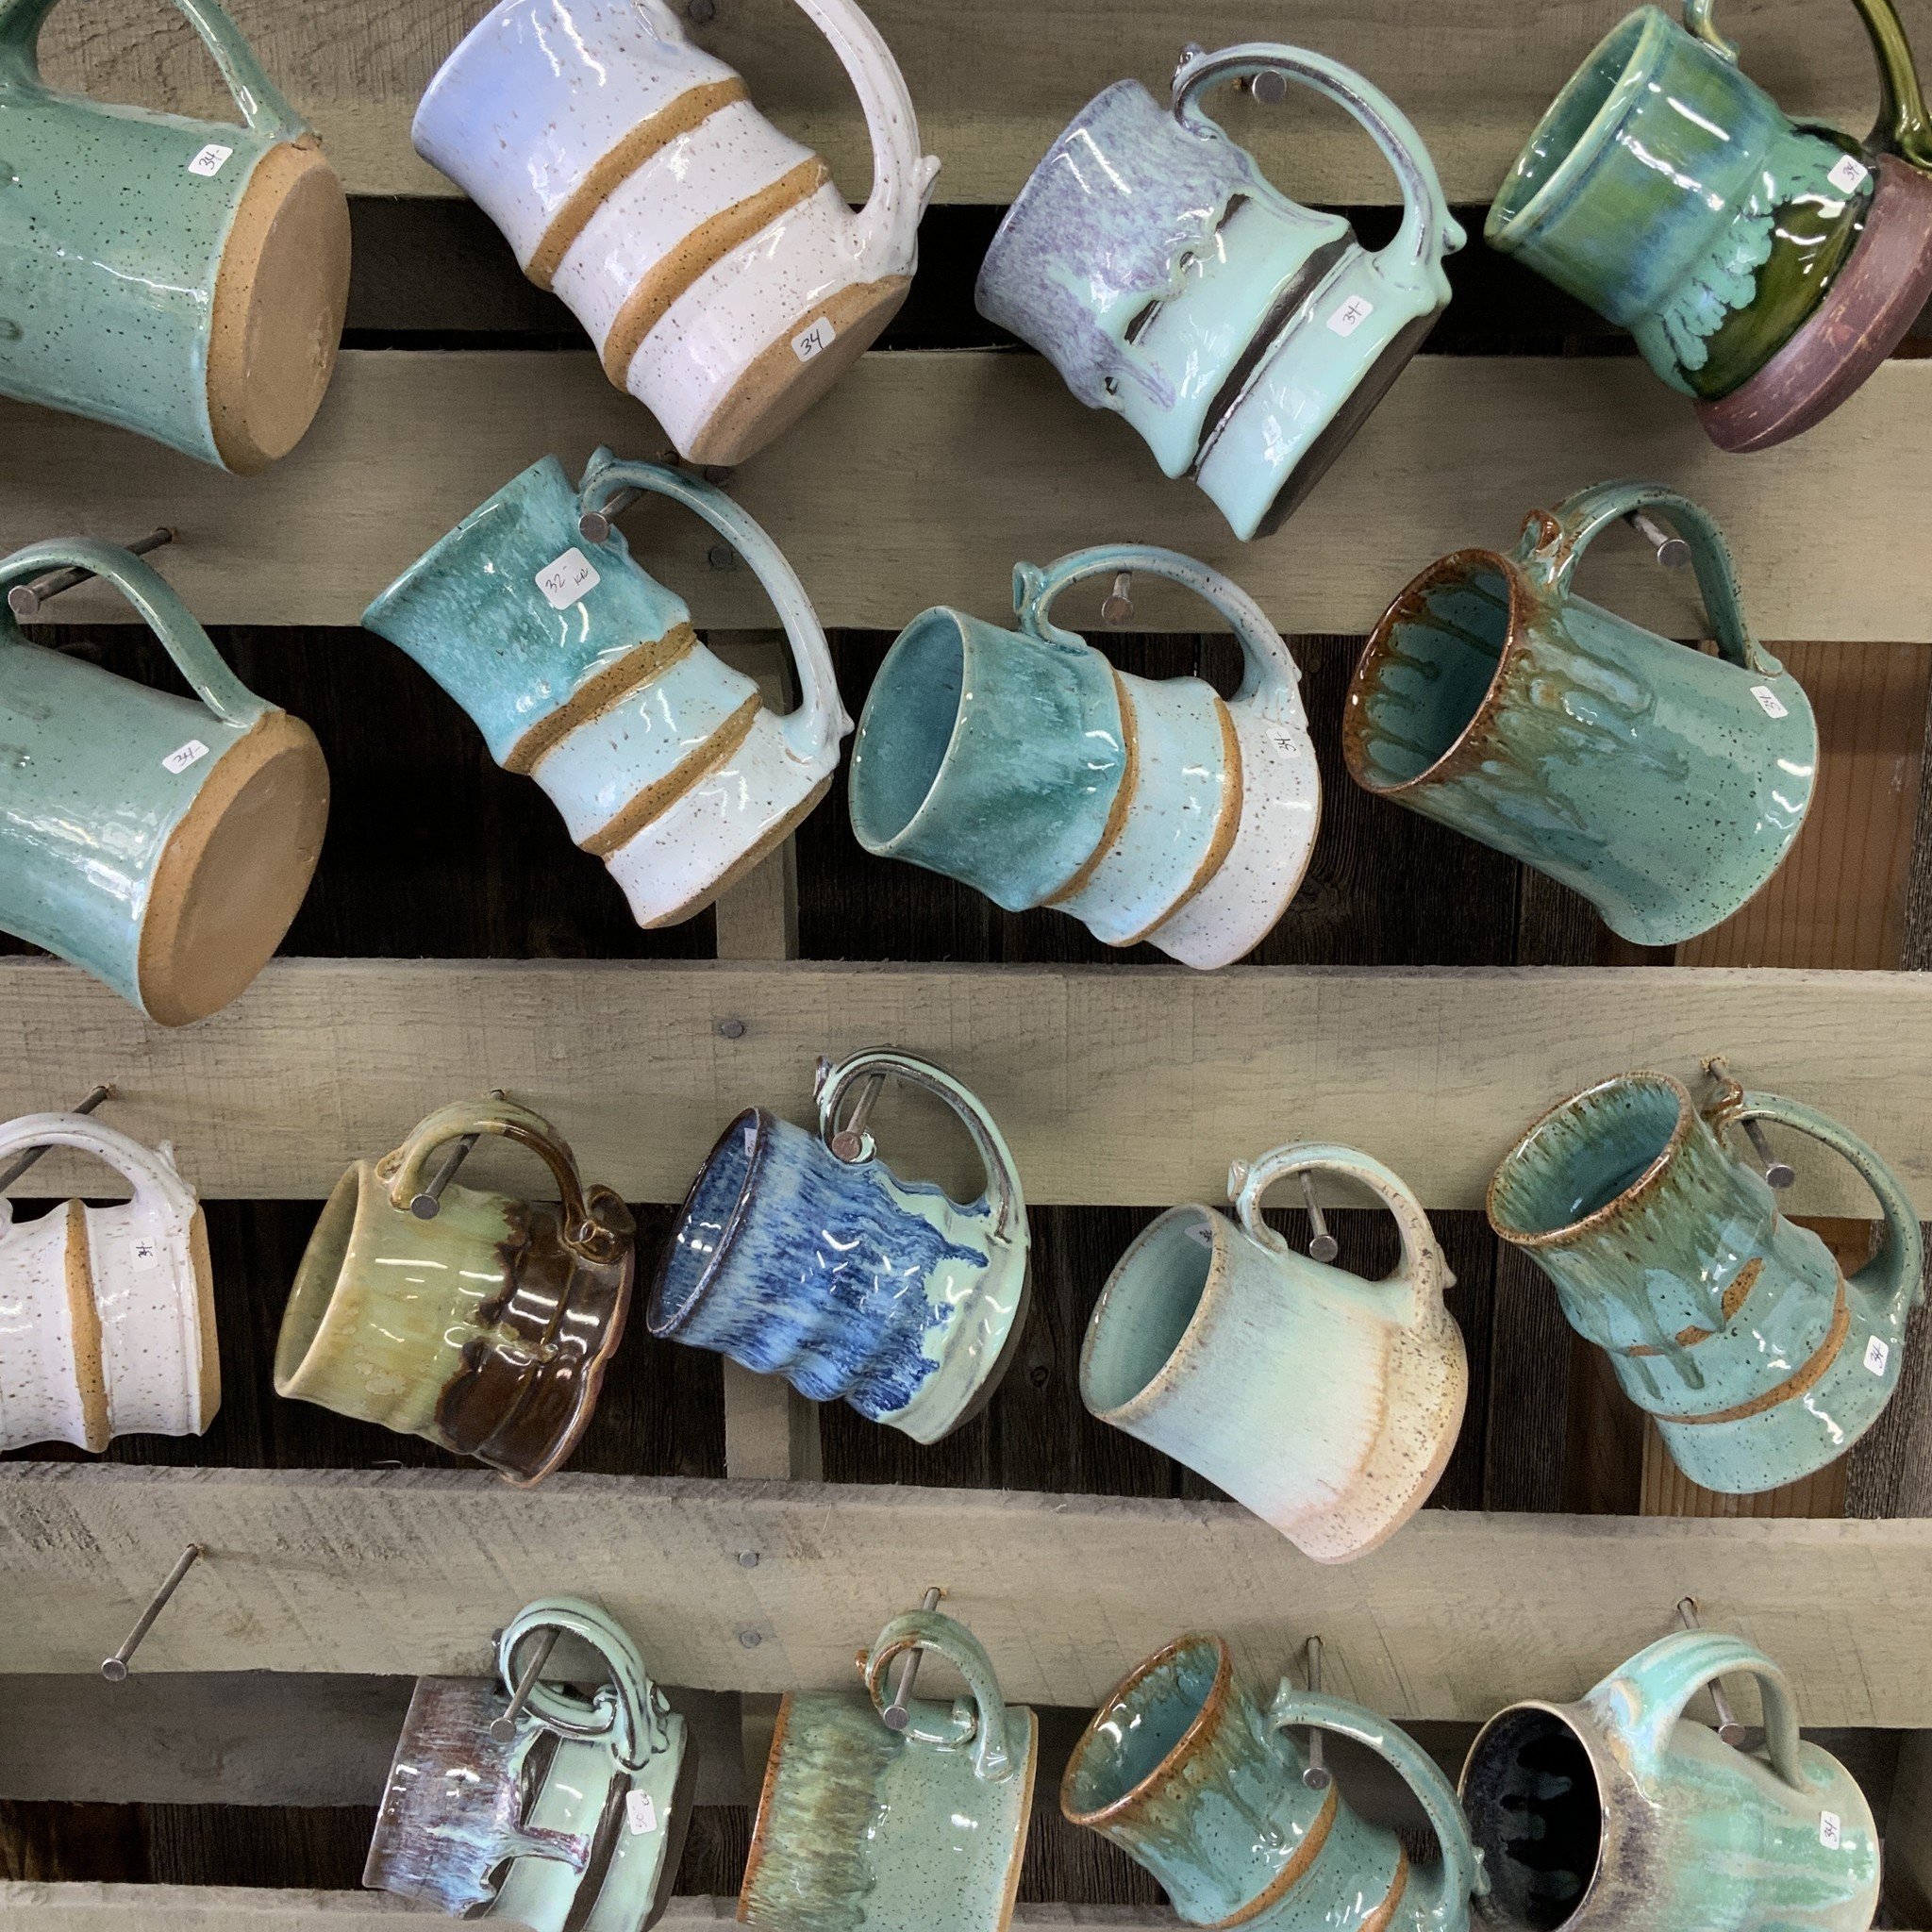 The Potter's Shop in Waukesha handmade pottery and gifts in Wisconsin handmade mugs